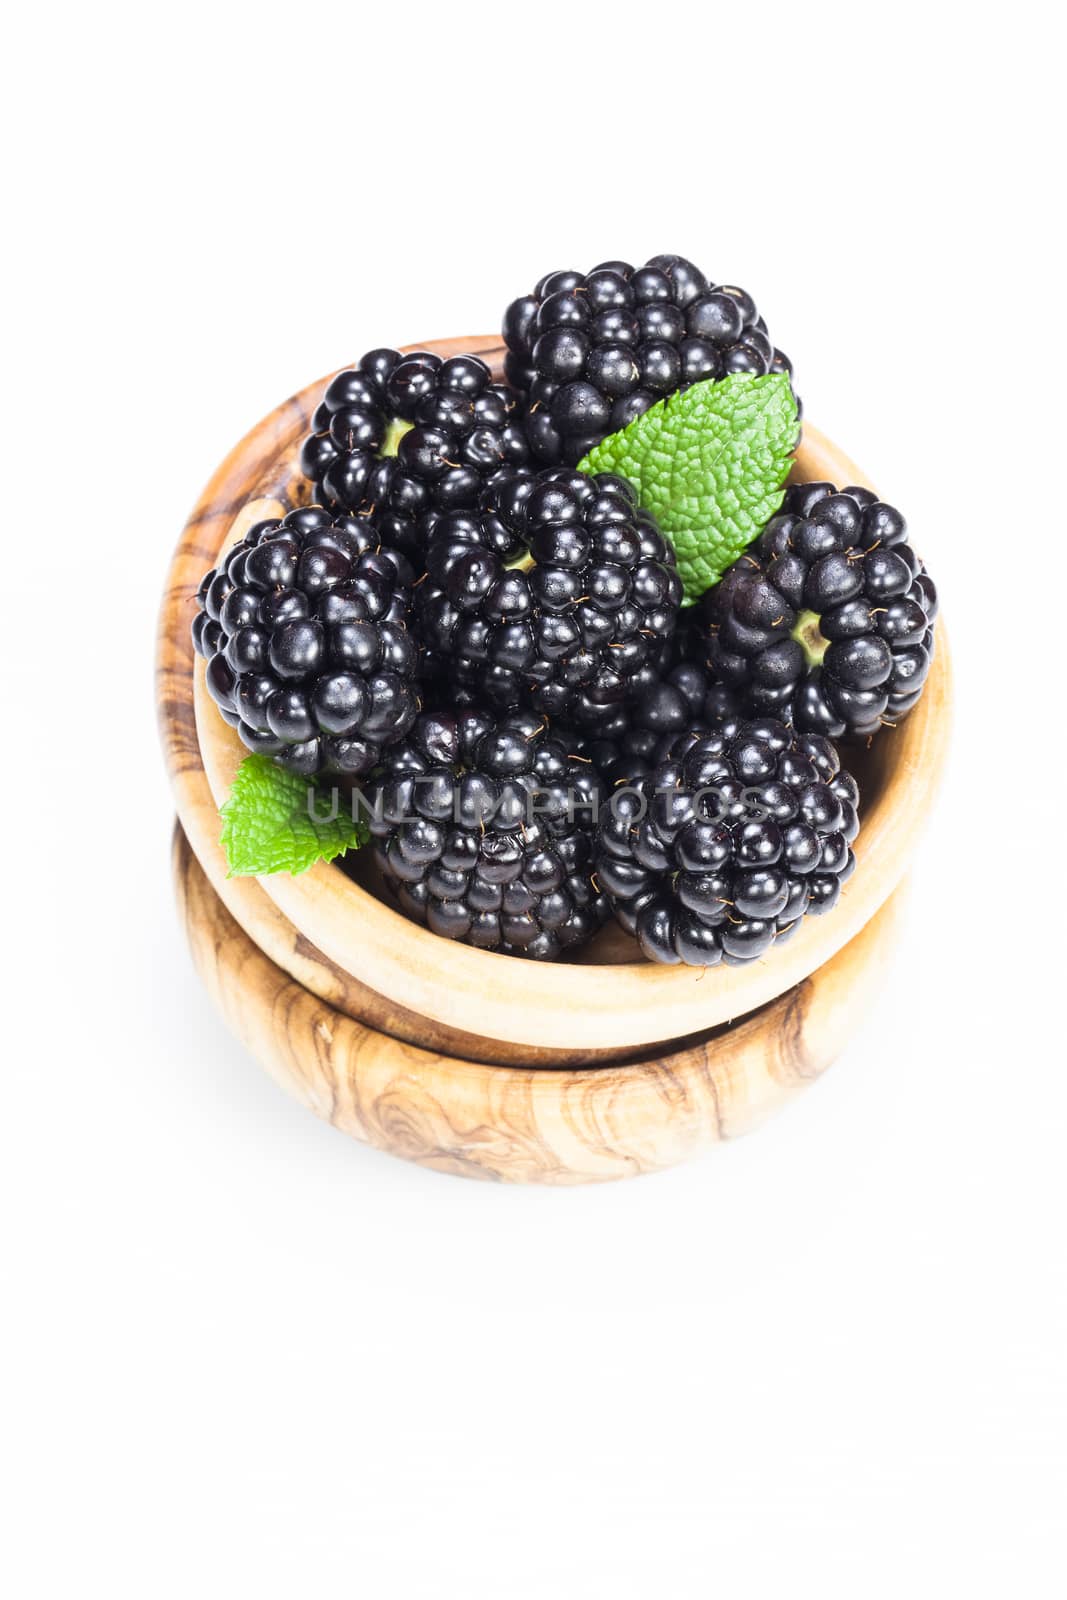 Fresh organic blackberries in olive wood bowl on white background . Copy space composition